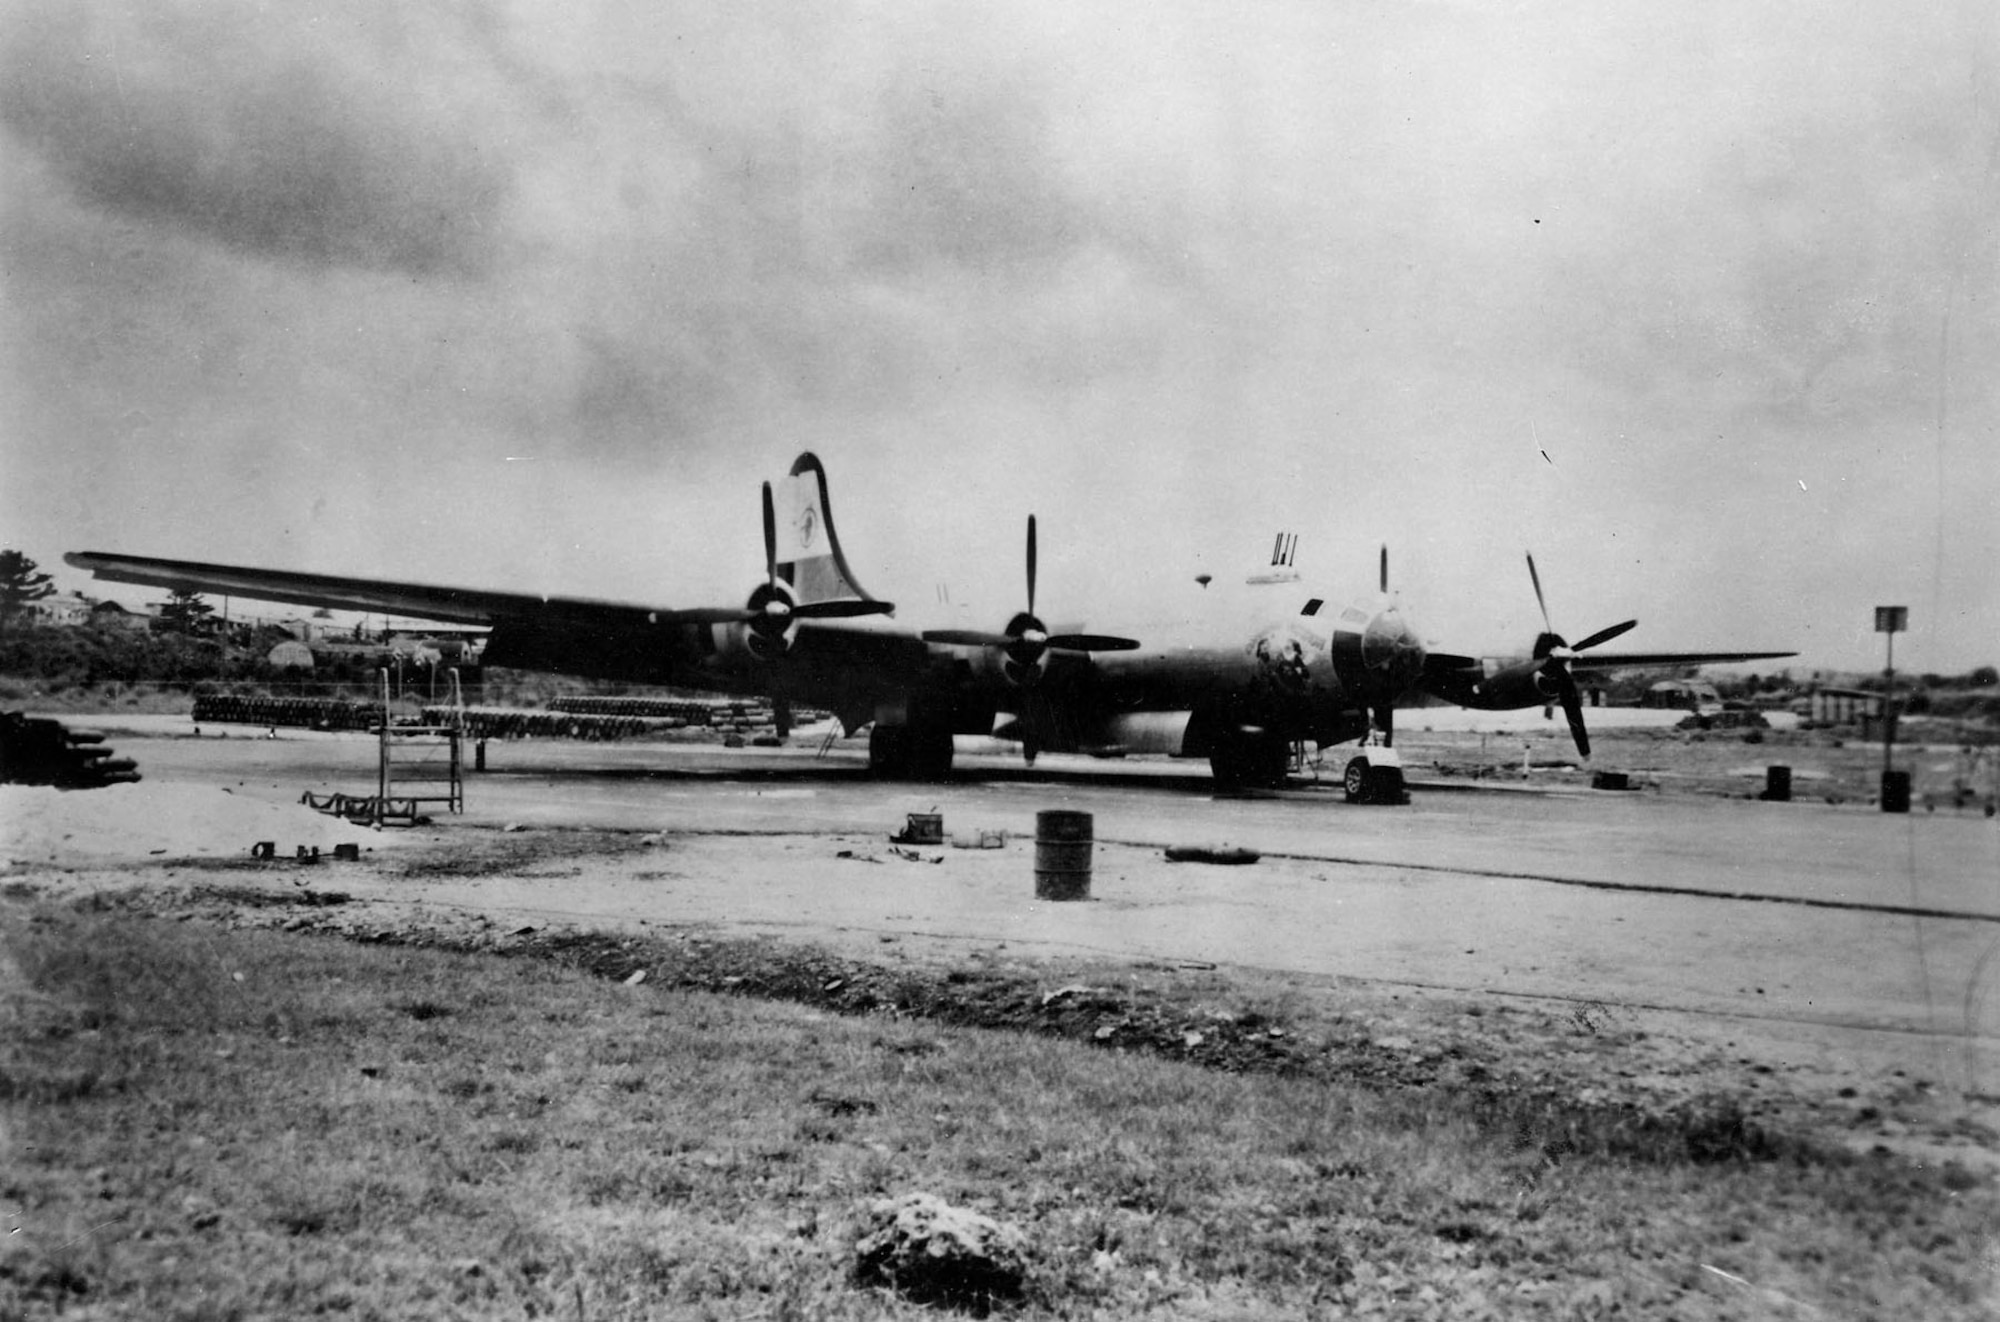 Boeing B-29 "Command Decision" during the Korean Conflict. (U.S. Air Force photo)